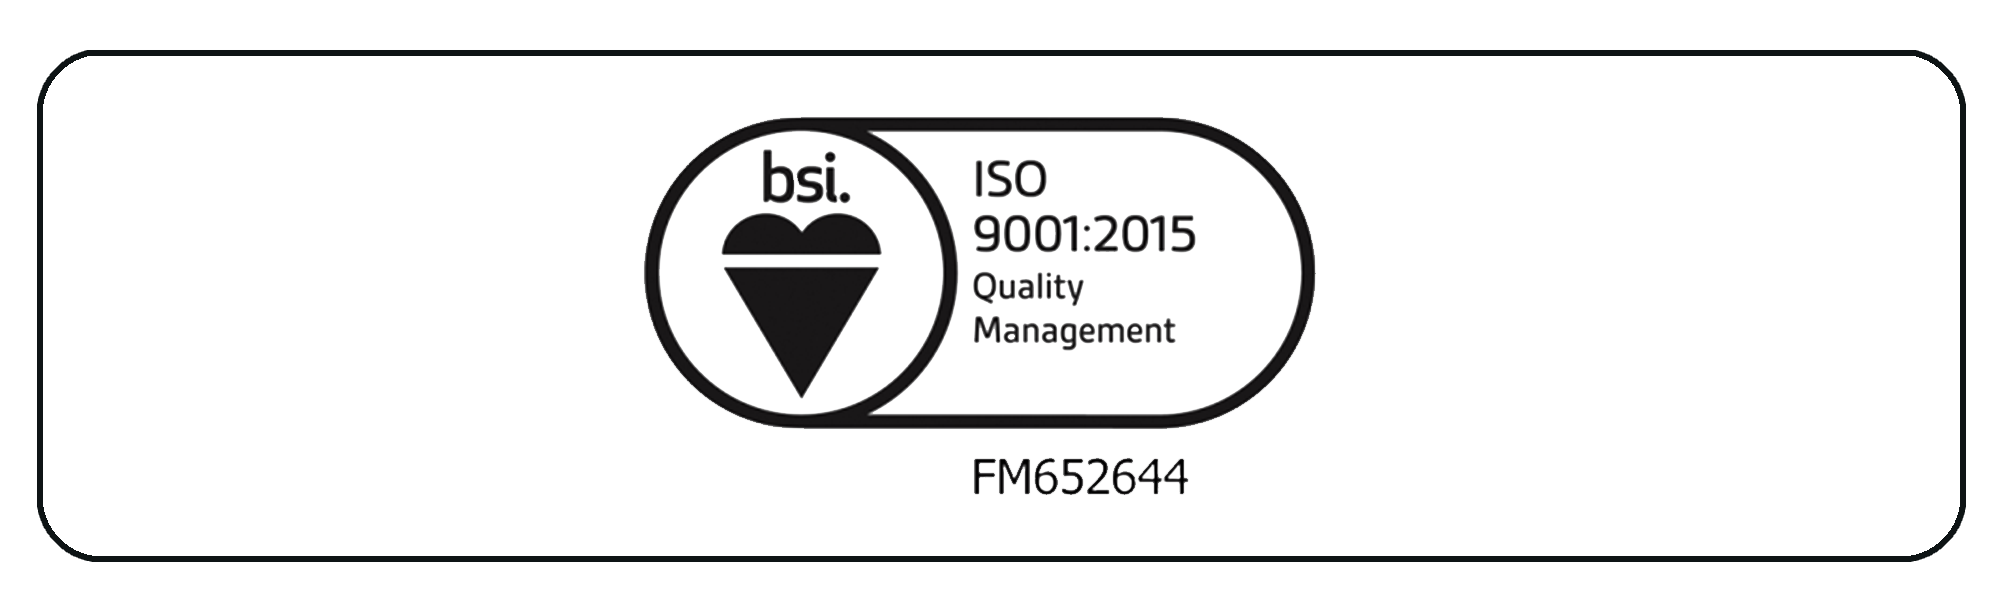 BSI ISO 9001:2015 Quality management certified